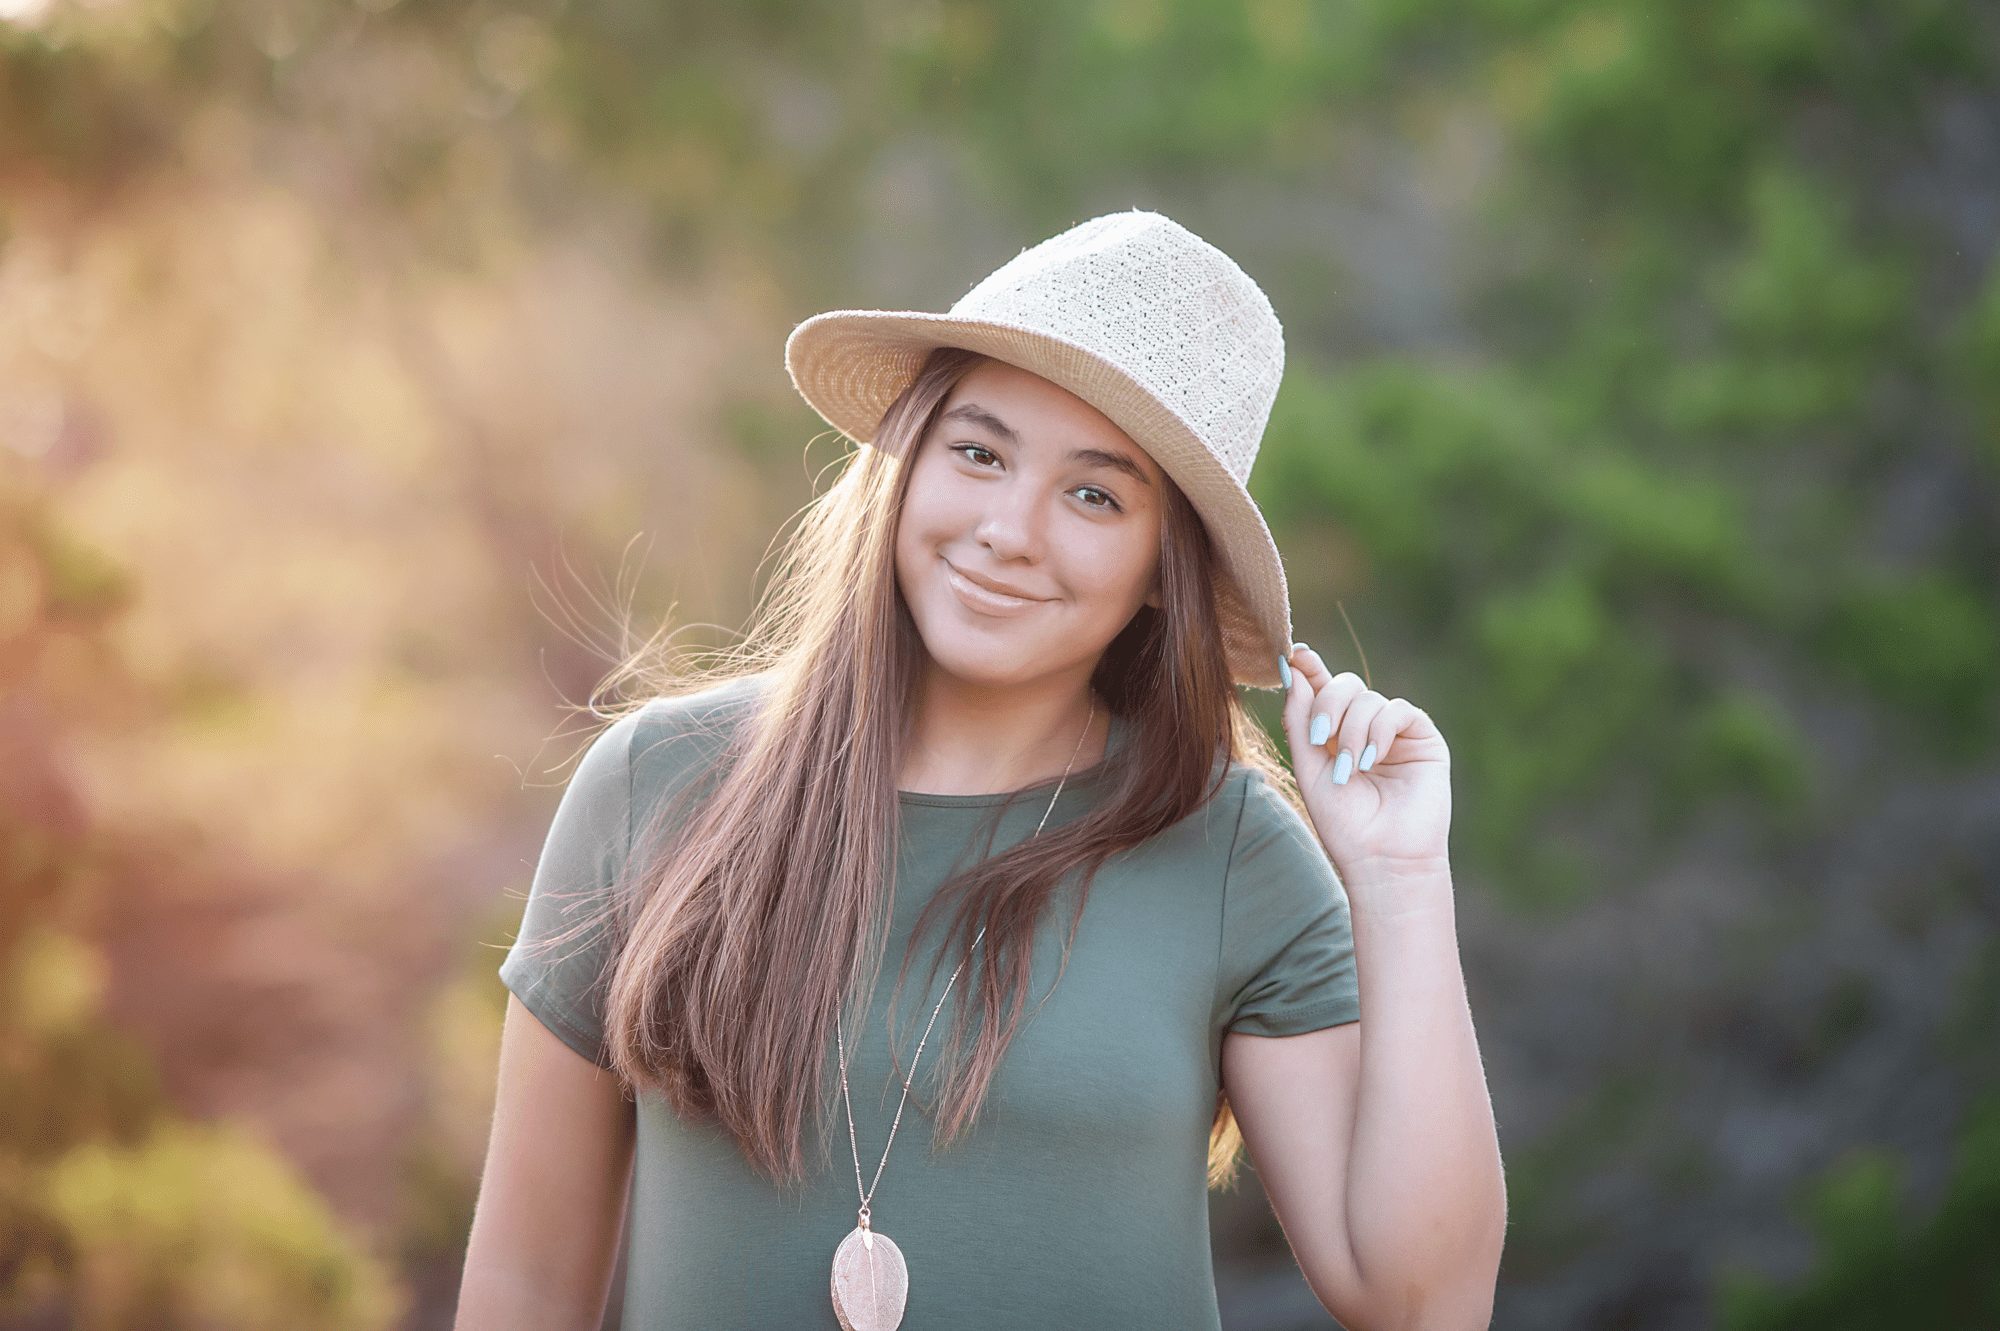 Teen with hat